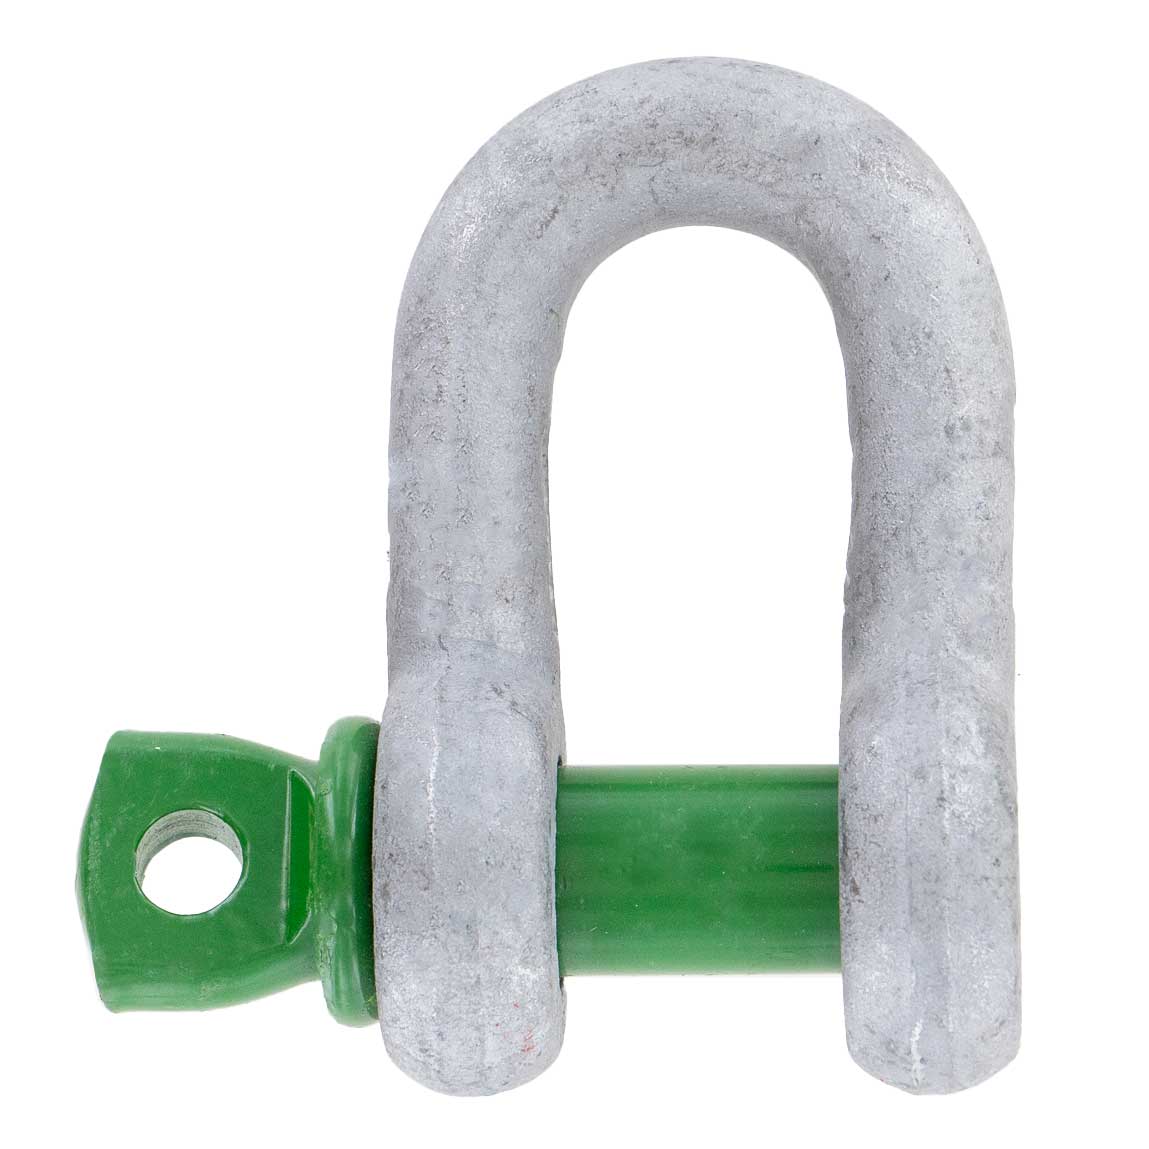 3/8" Van Beest Green Pin® Screw Pin Chain Shackle | G-4151 - 1 Ton rear view